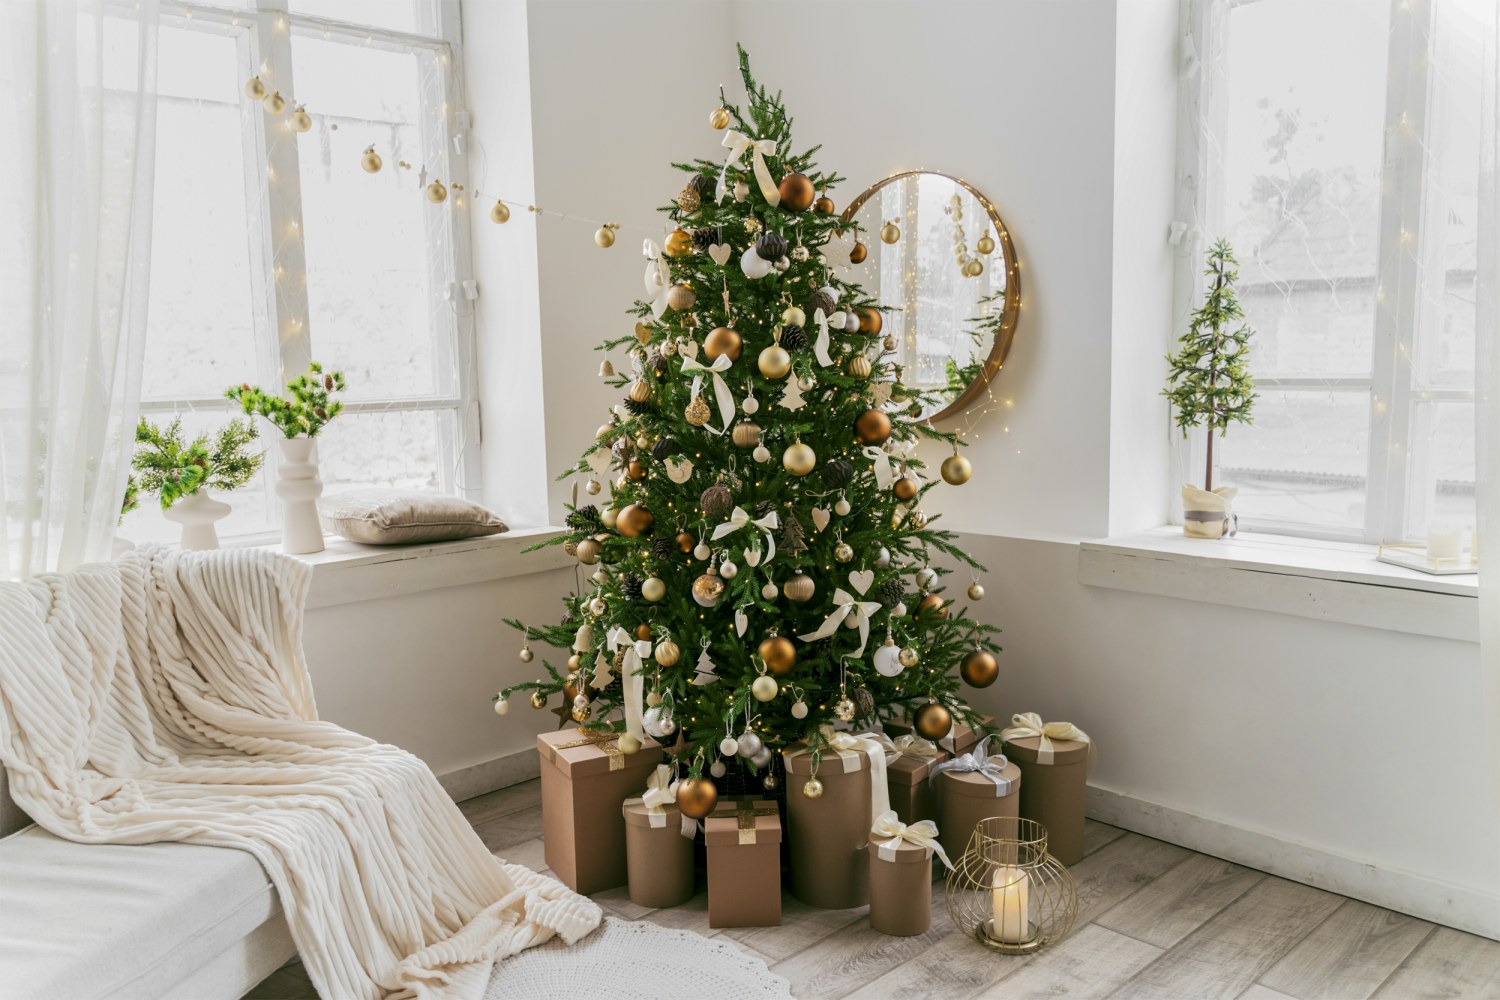 When to Take Down Christmas Trees, According to Experts and Tradition